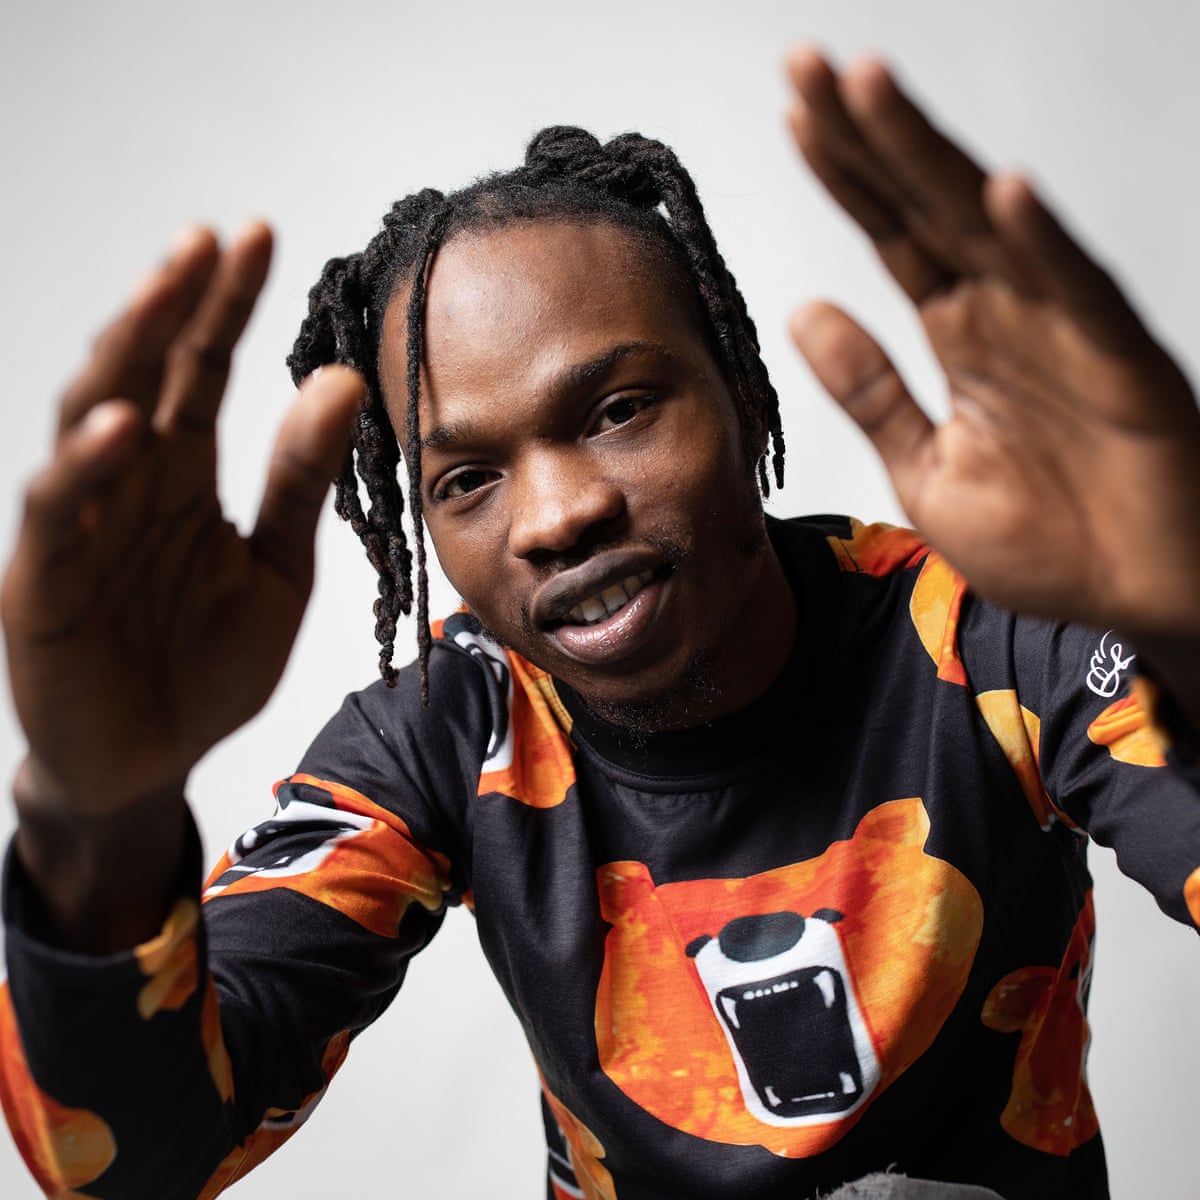 naira-marley-arrested-charged-fined-oprah-billboard-breonna-taylor-willian-arsenal-chelsea-latest-news-global-world-stories-friday-august-2020-style-rave